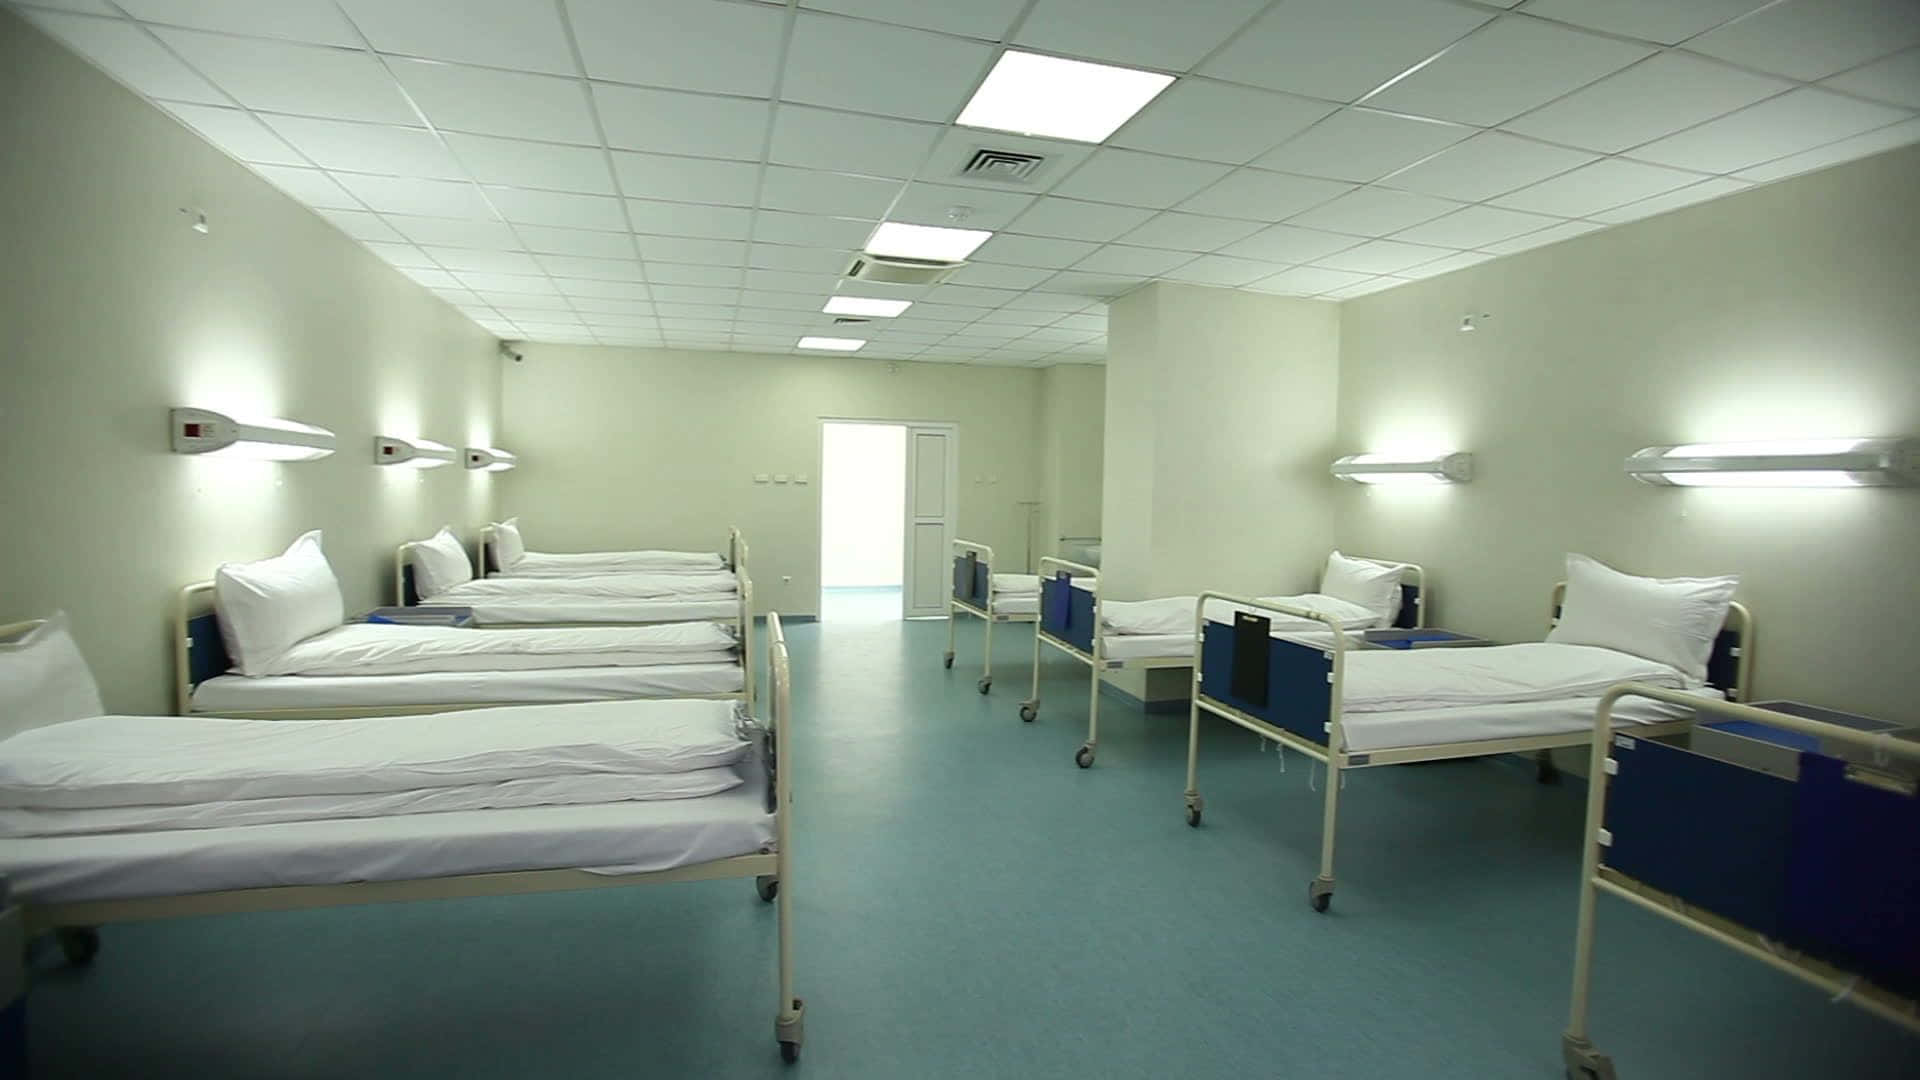 A Row Of Beds In A Hospital Room